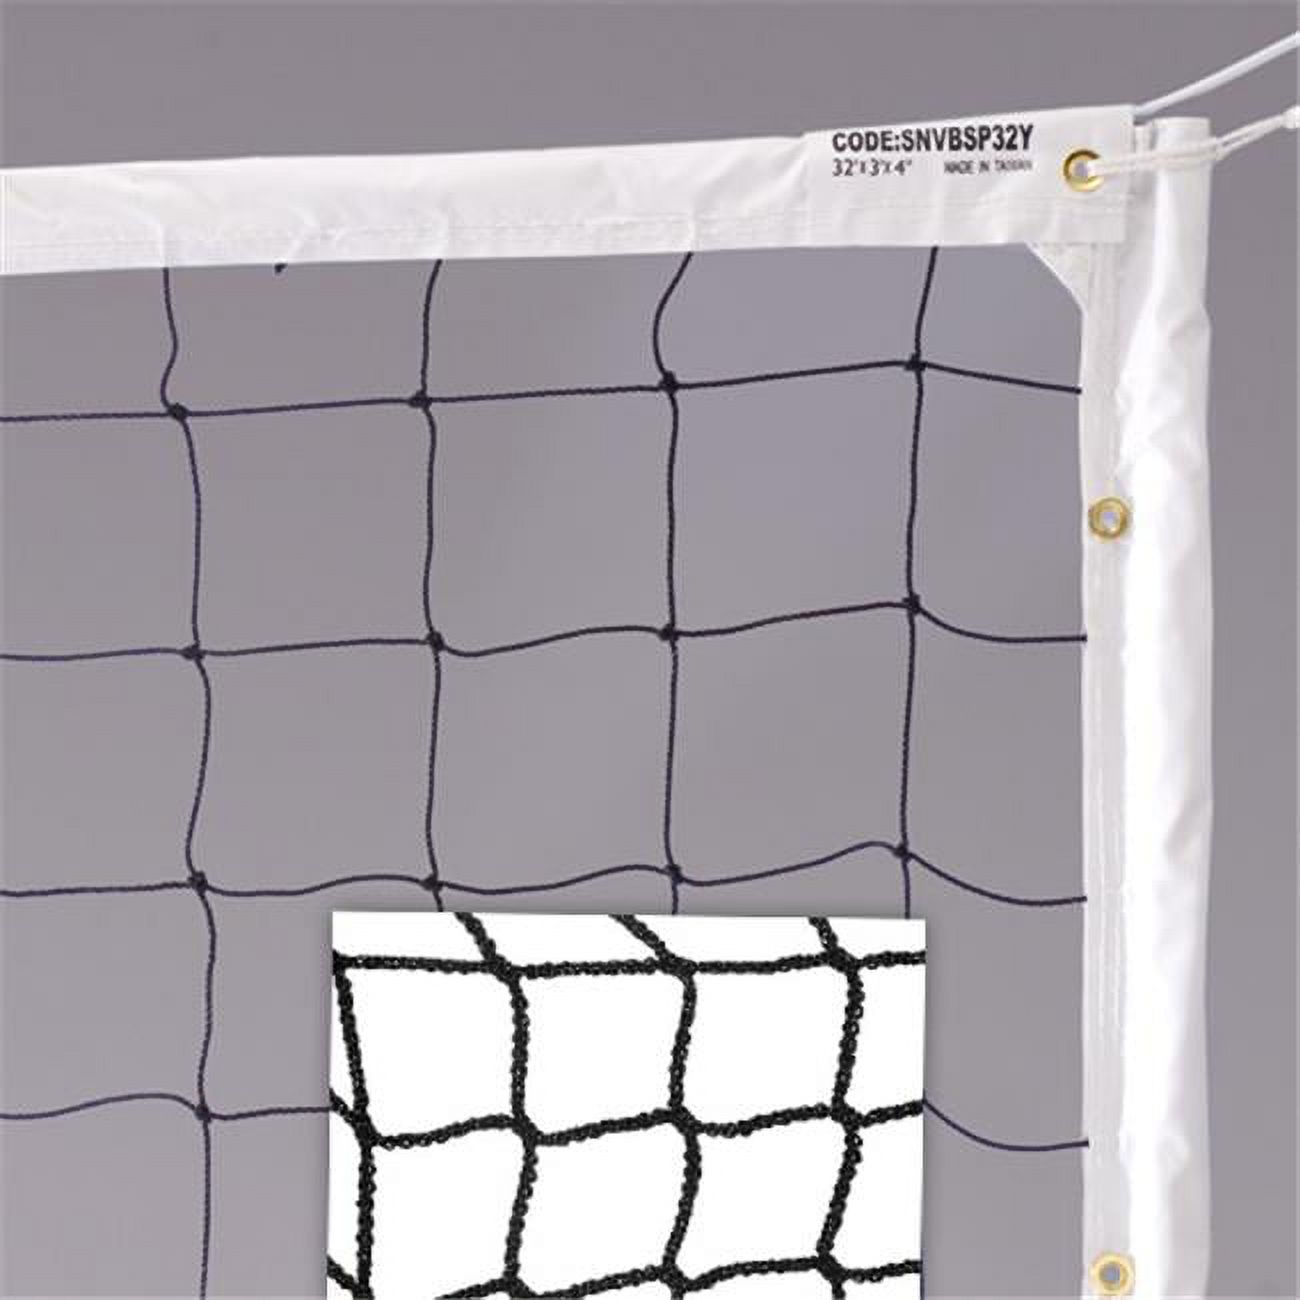 MacGregor Pro Power 2 Regulation-Size Volleyball Net - image 1 of 1